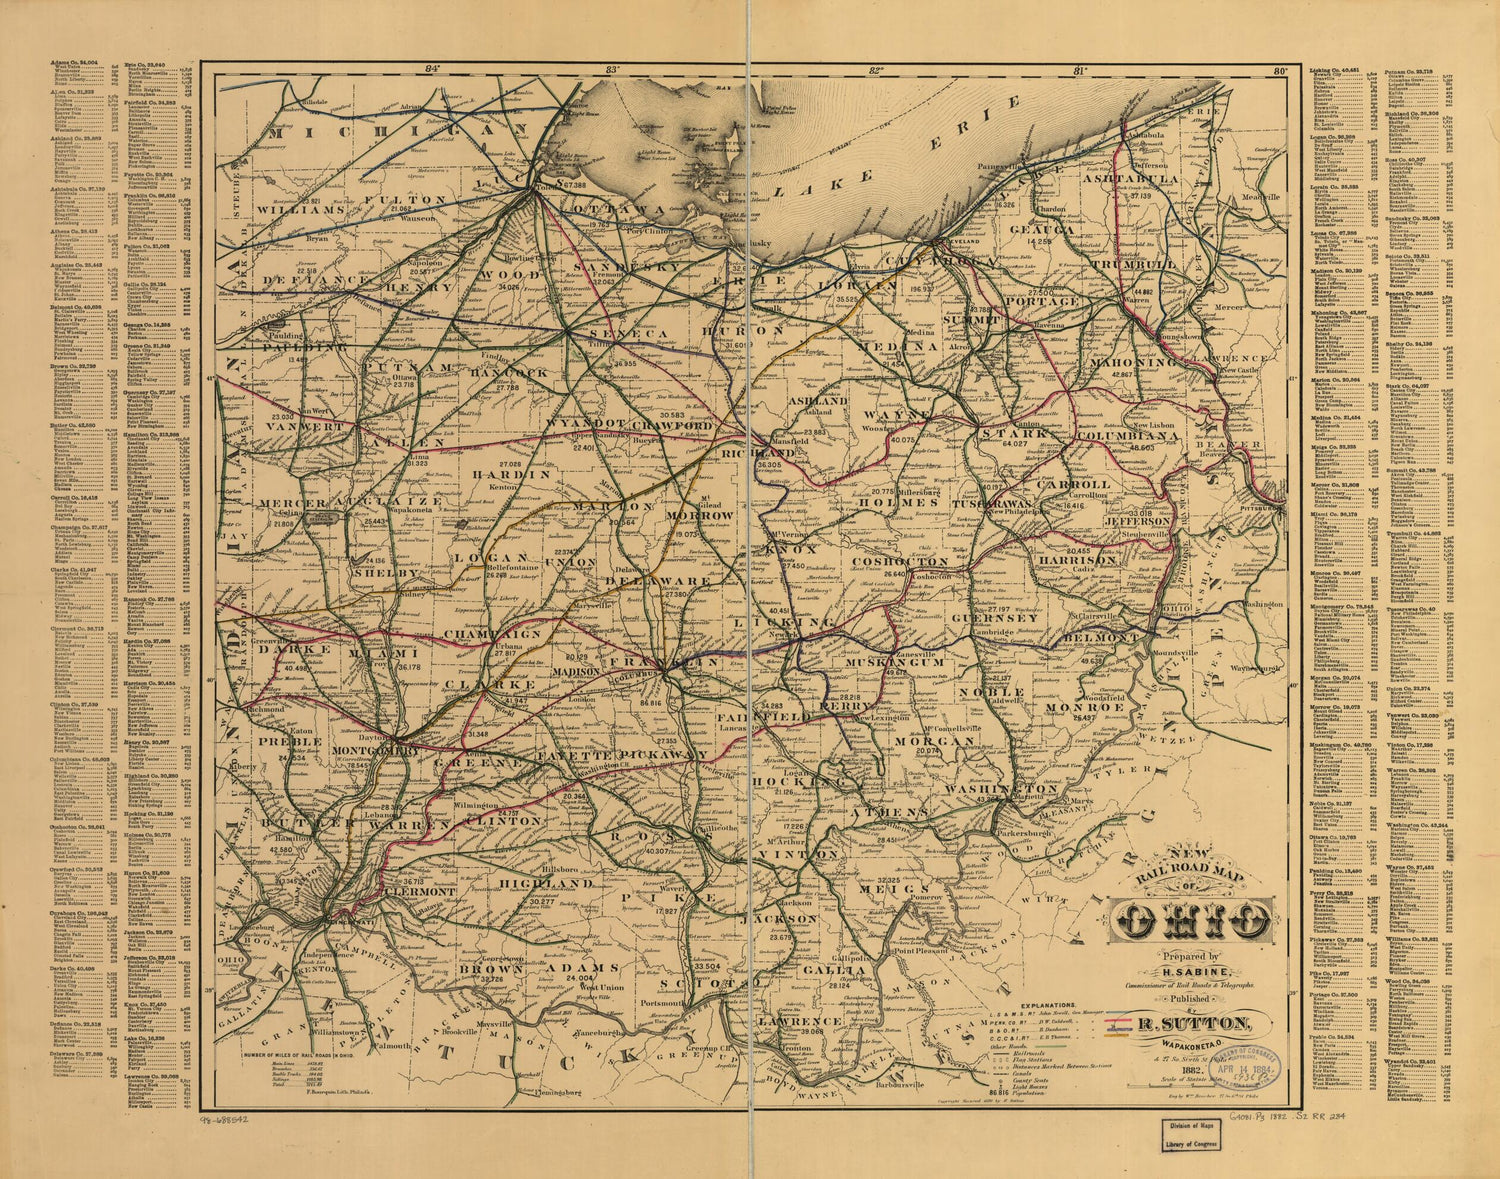 This old map of New Rail Road Map of Ohio Prepared by H. Sabine, Commissioner of Rail Roads &amp; Telegraphs from 1882 was created by H. Sabine in 1882